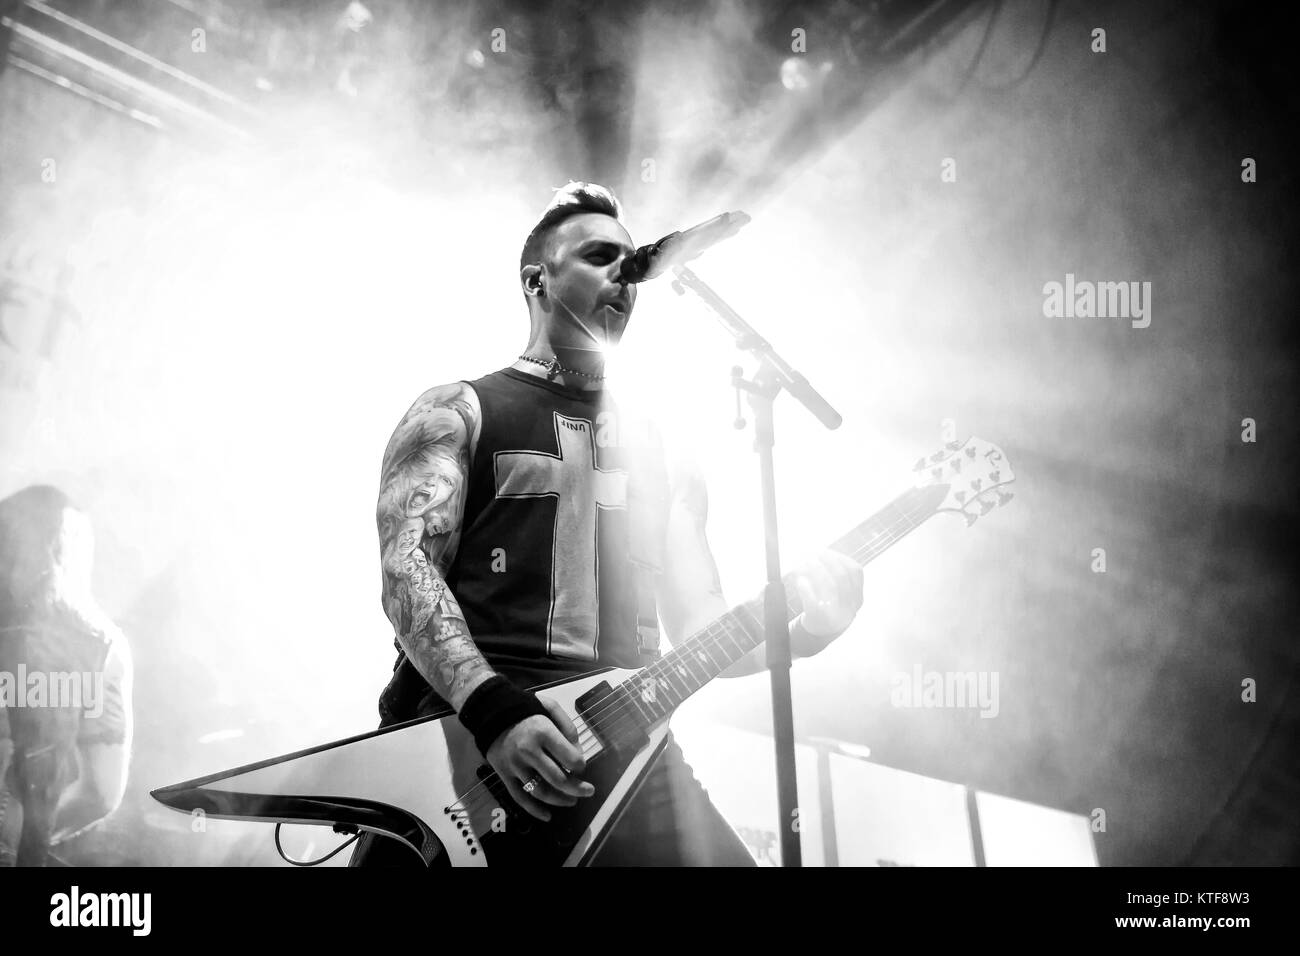 Bullet for My Valentine, the Welsh heavy metal band, performs a live  concert at Rockefeller. Here vocalist and guitarist Matthew Tuck is seen  live on stage. Norway, 03/04 2014 Stock Photo - Alamy